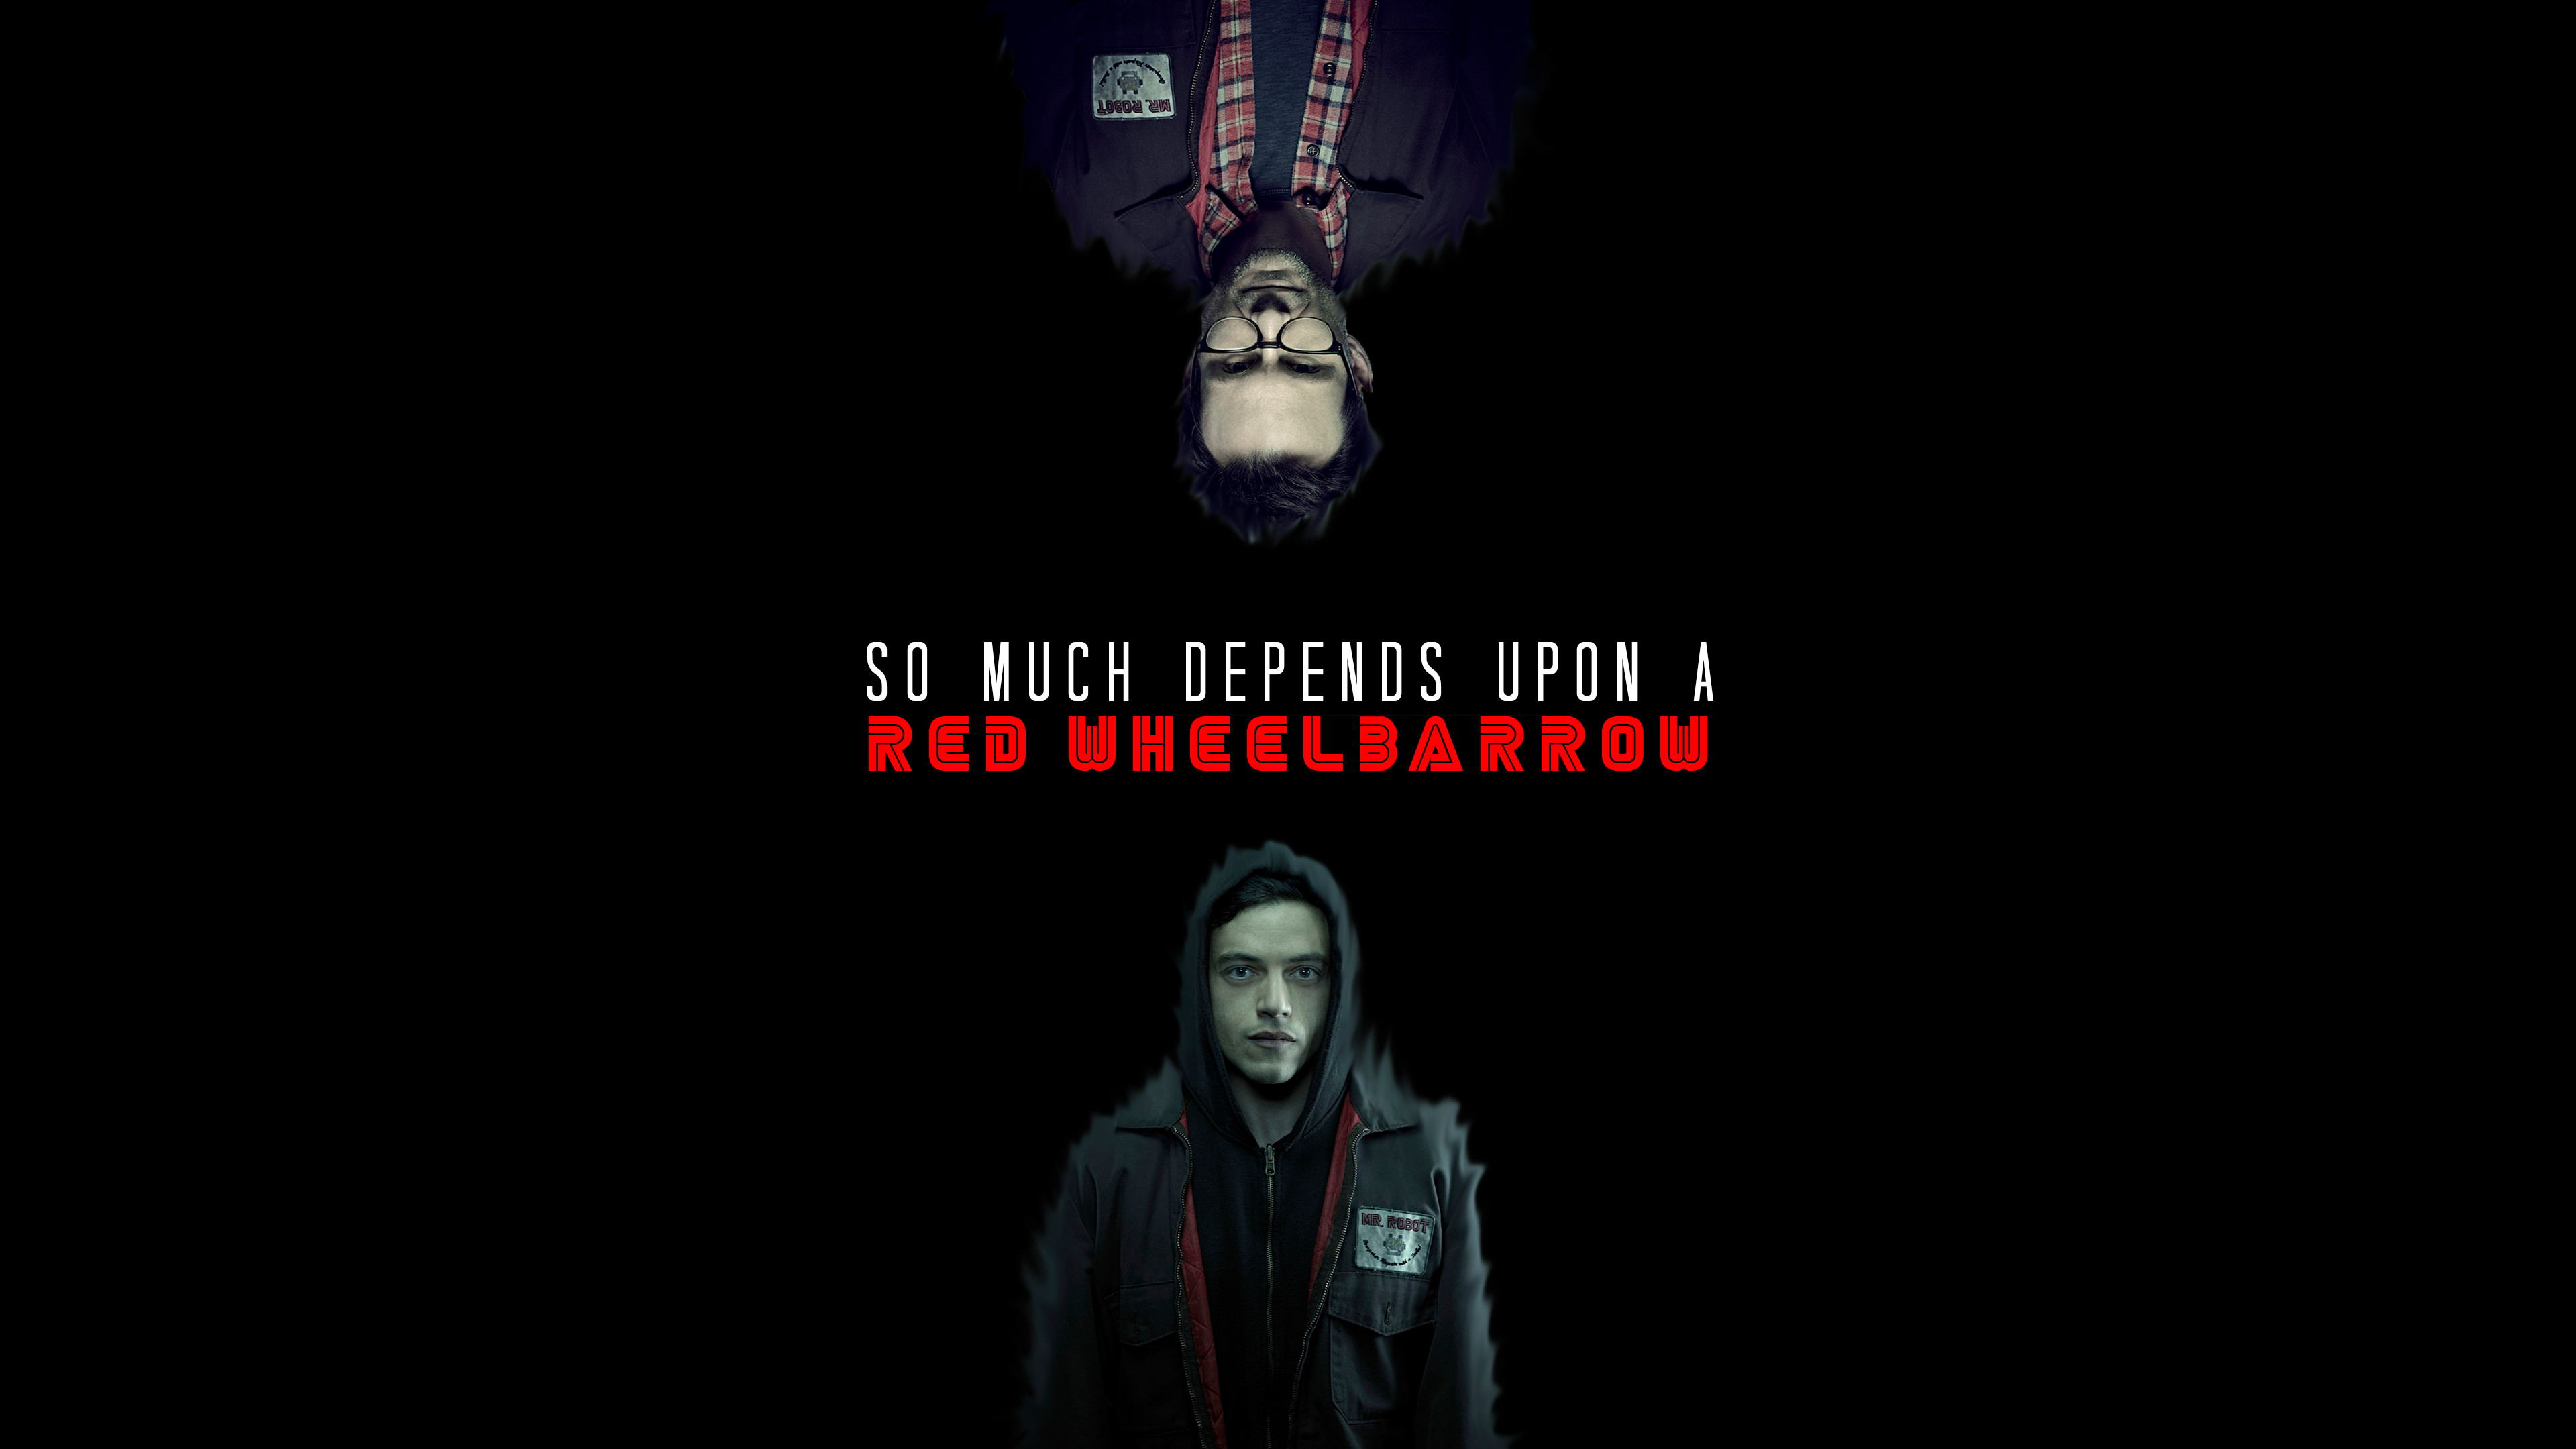 Mr. Robot Wallpaper Control Is An Illusion : r/wallpapers